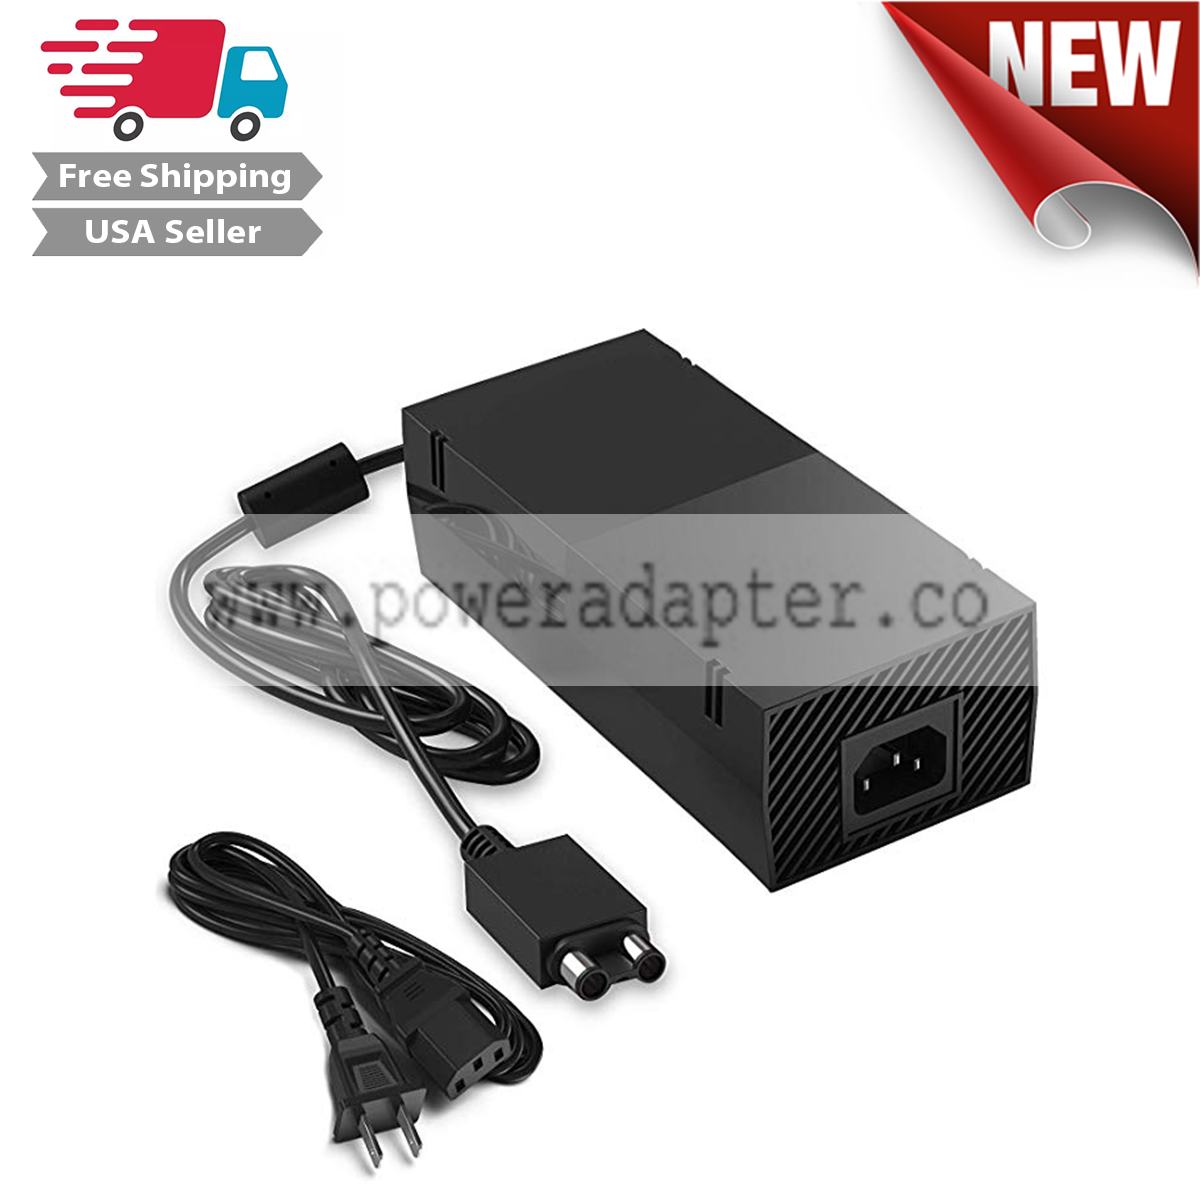 For Microsoft XBOX ONE Console AC Adapter Brick Charger Power Supply Cord Cable Weight: 1.45 pounds Brand: Xbox One - Click Image to Close